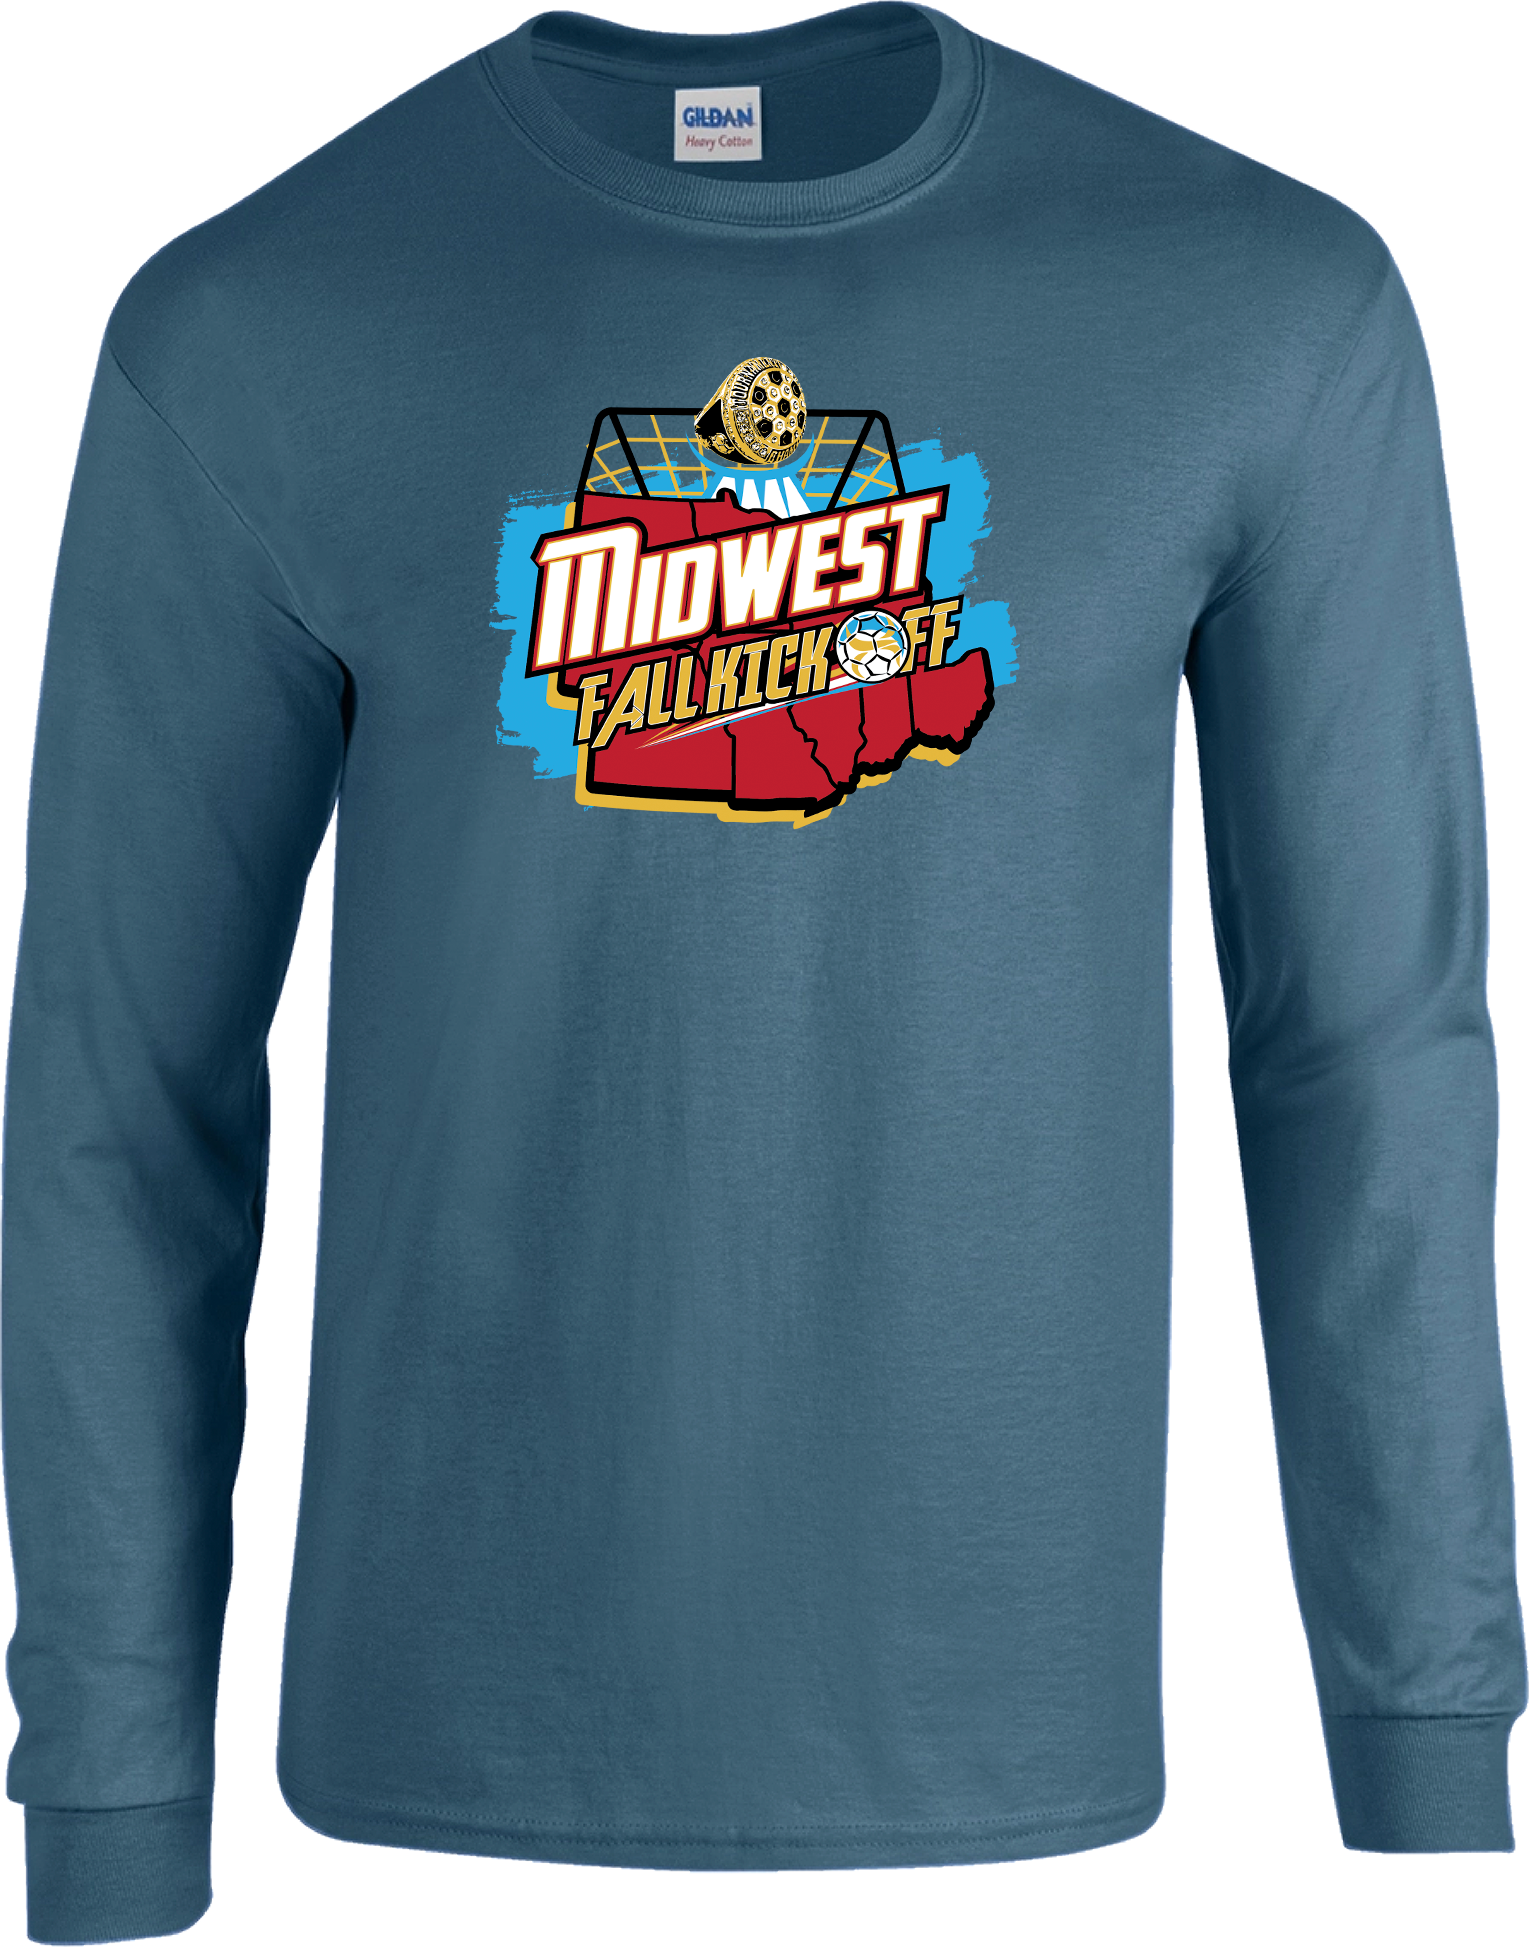 LONG SLEEVES - 2023 Midwest Fall Kickoff